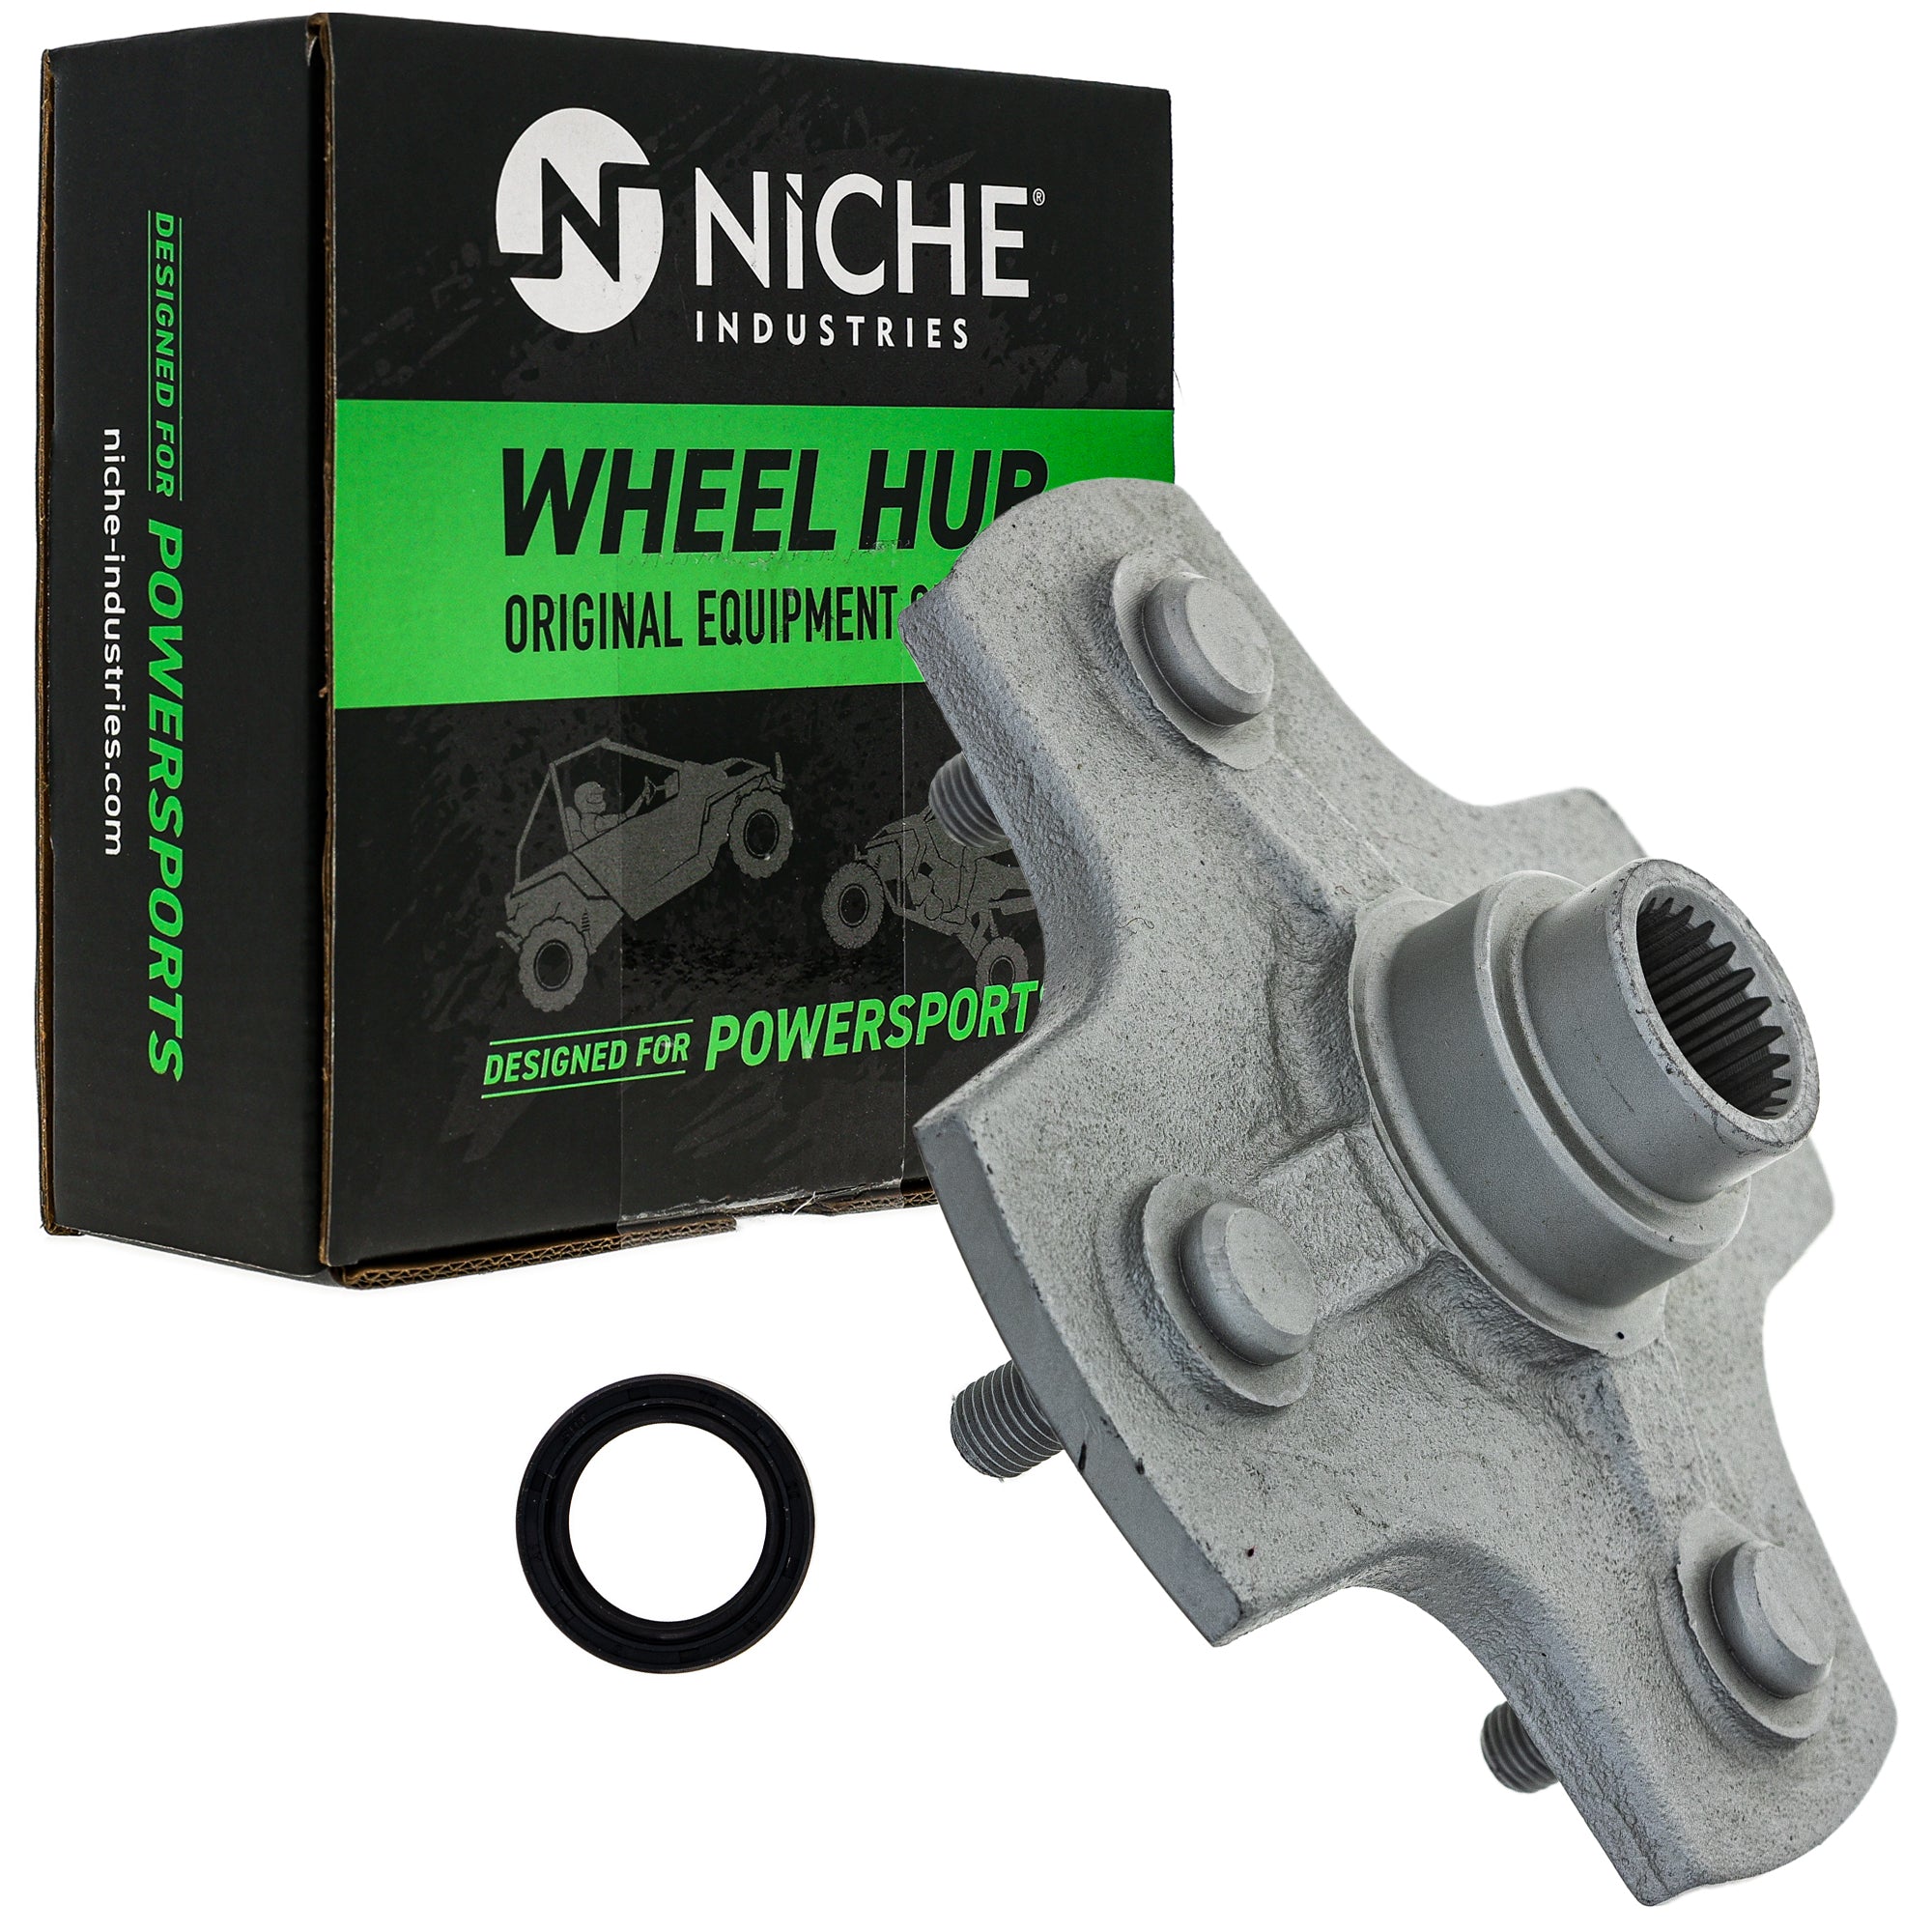 NICHE 519-CWH-2226B Wheel Hub for zOTHER Rancher FourTrax Foreman